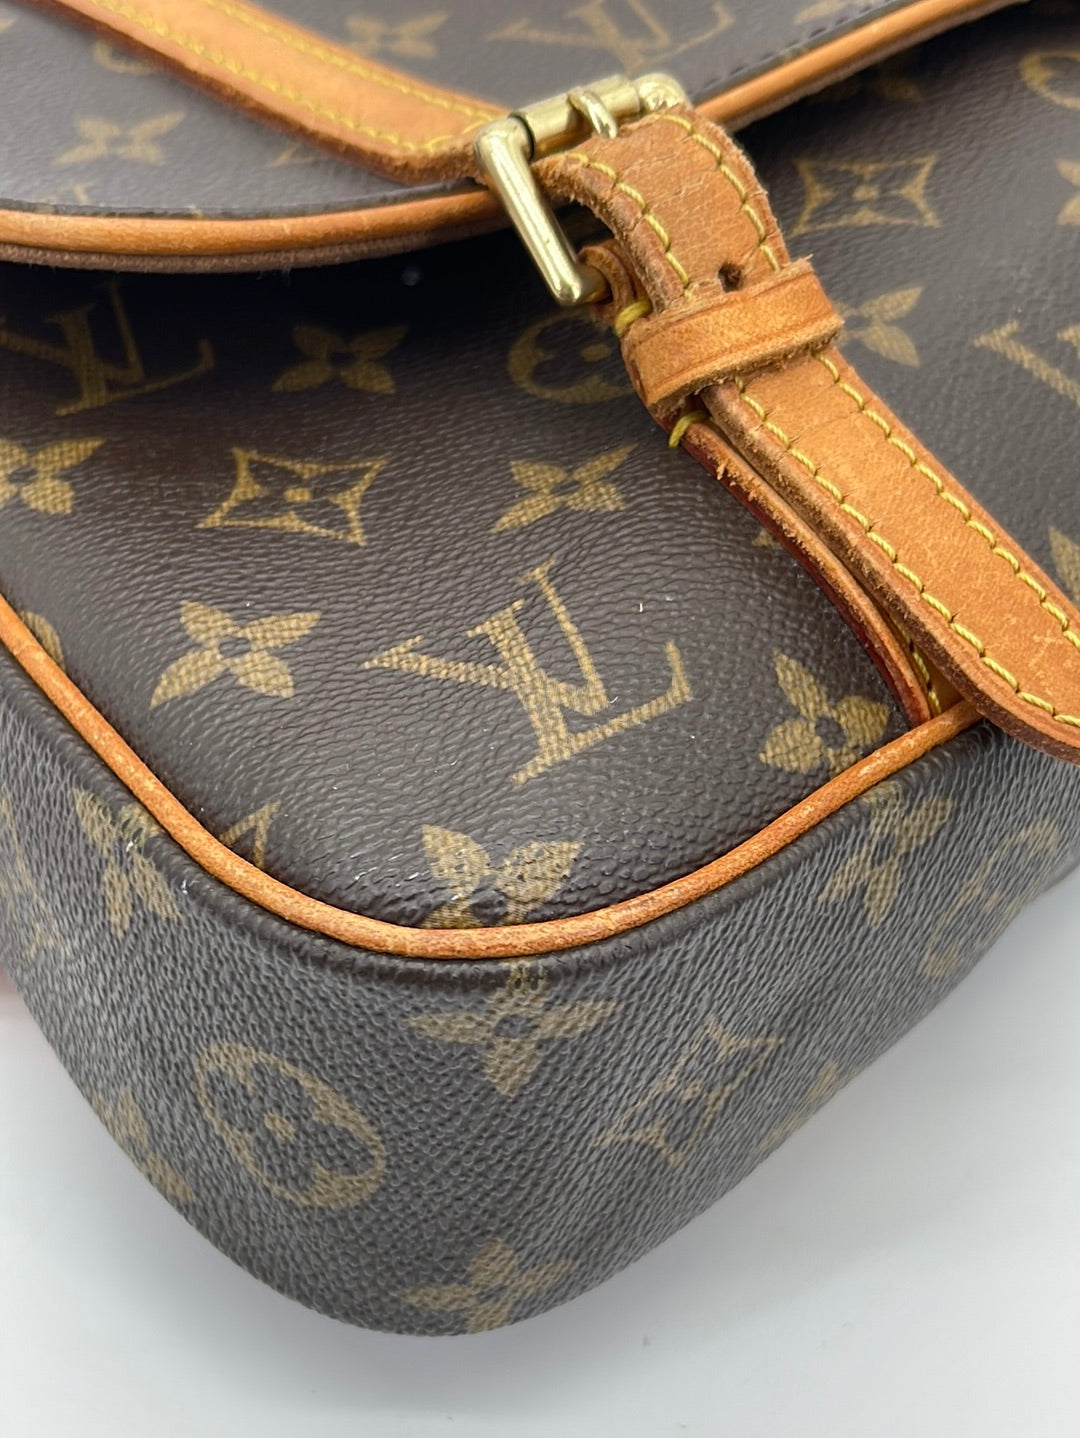 double sided louis vuitton bag